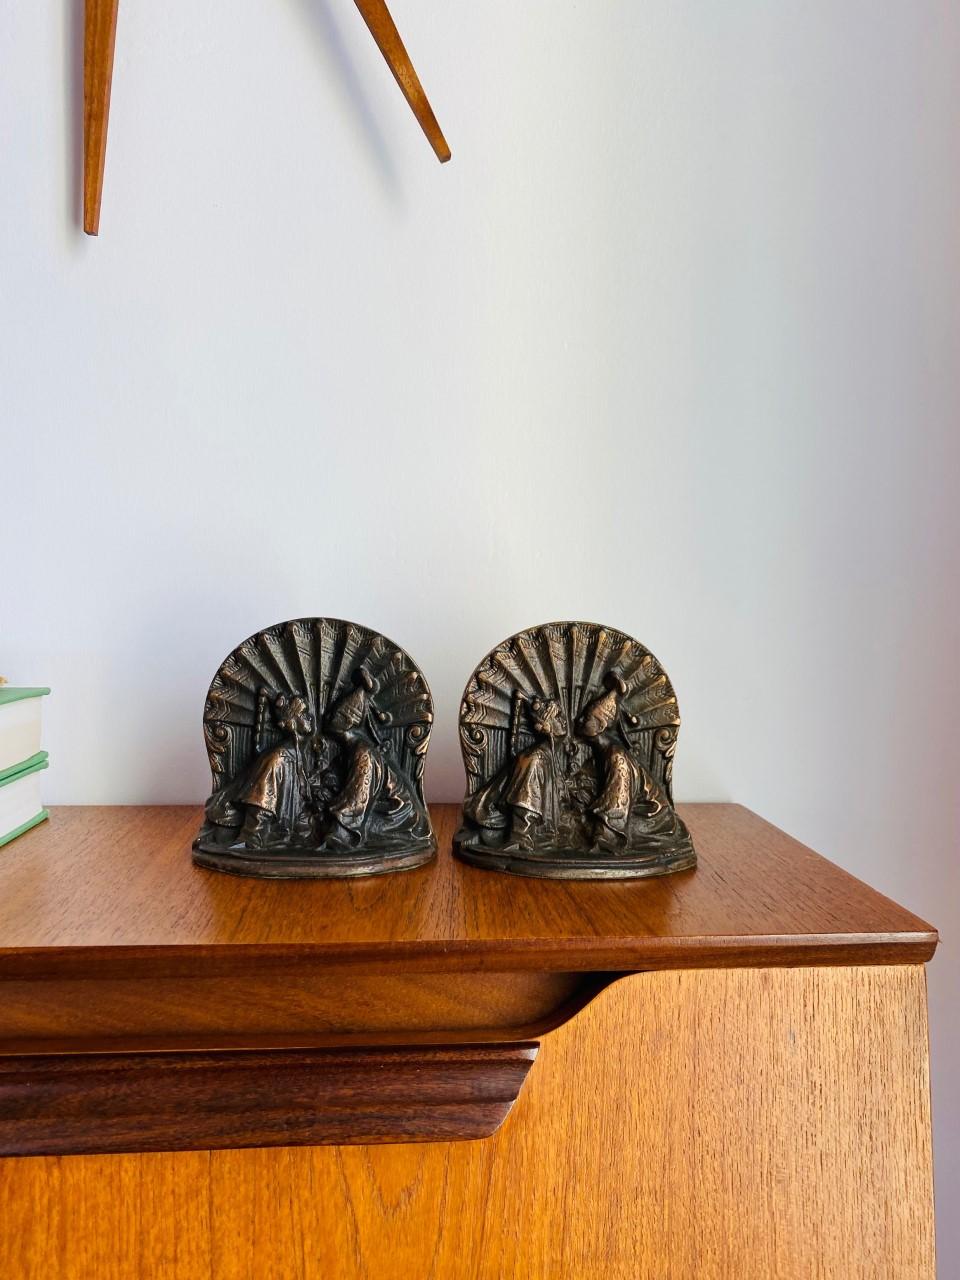 American Vintage Art Deco Brass Siam Couple Kissing Sculpture Bookends For Sale